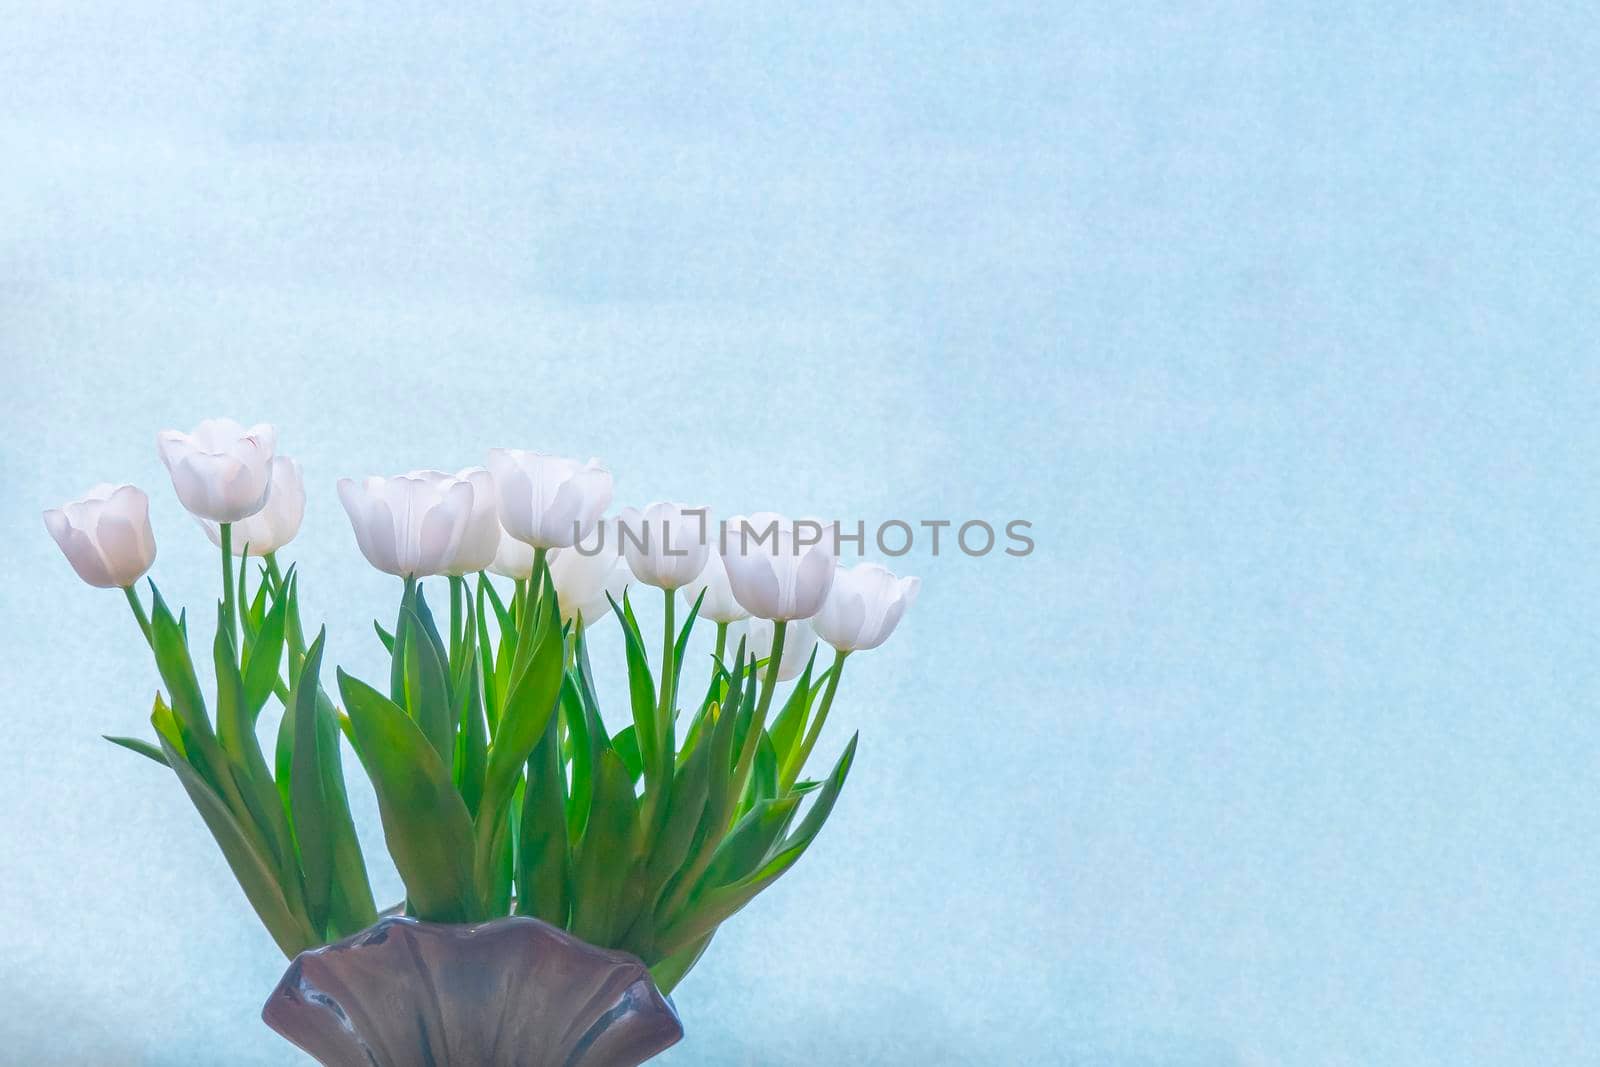 spring greeting card with flowers: white tulips on a sky-blue background. The concept of spring, tenderness, femininity. copy space